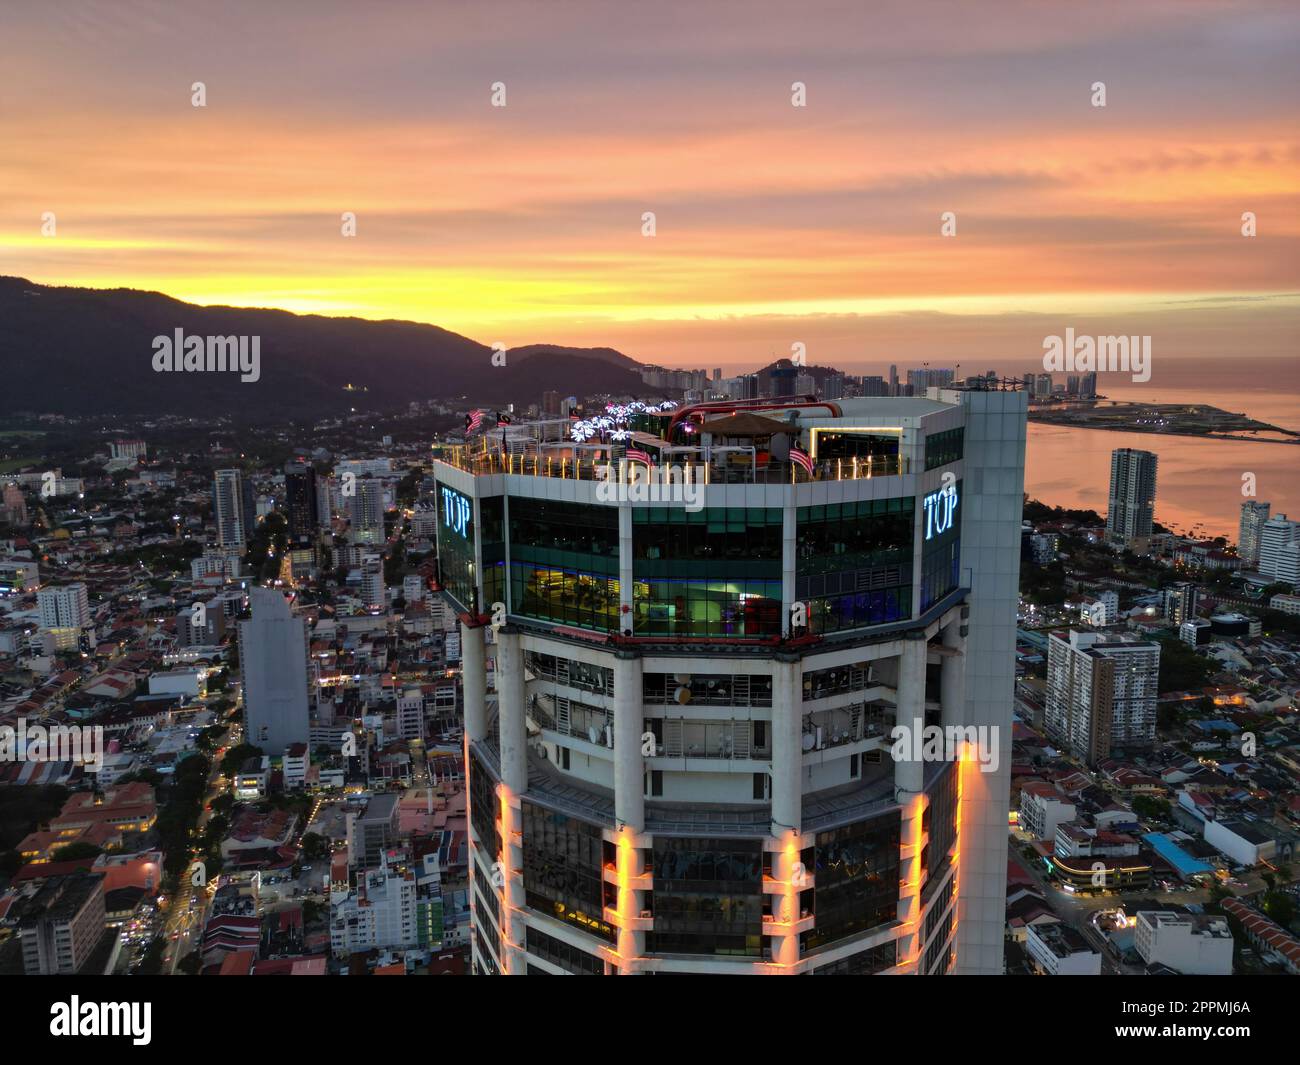 Aerial view Komtar the top building during dramatic sunset hour Stock Photo